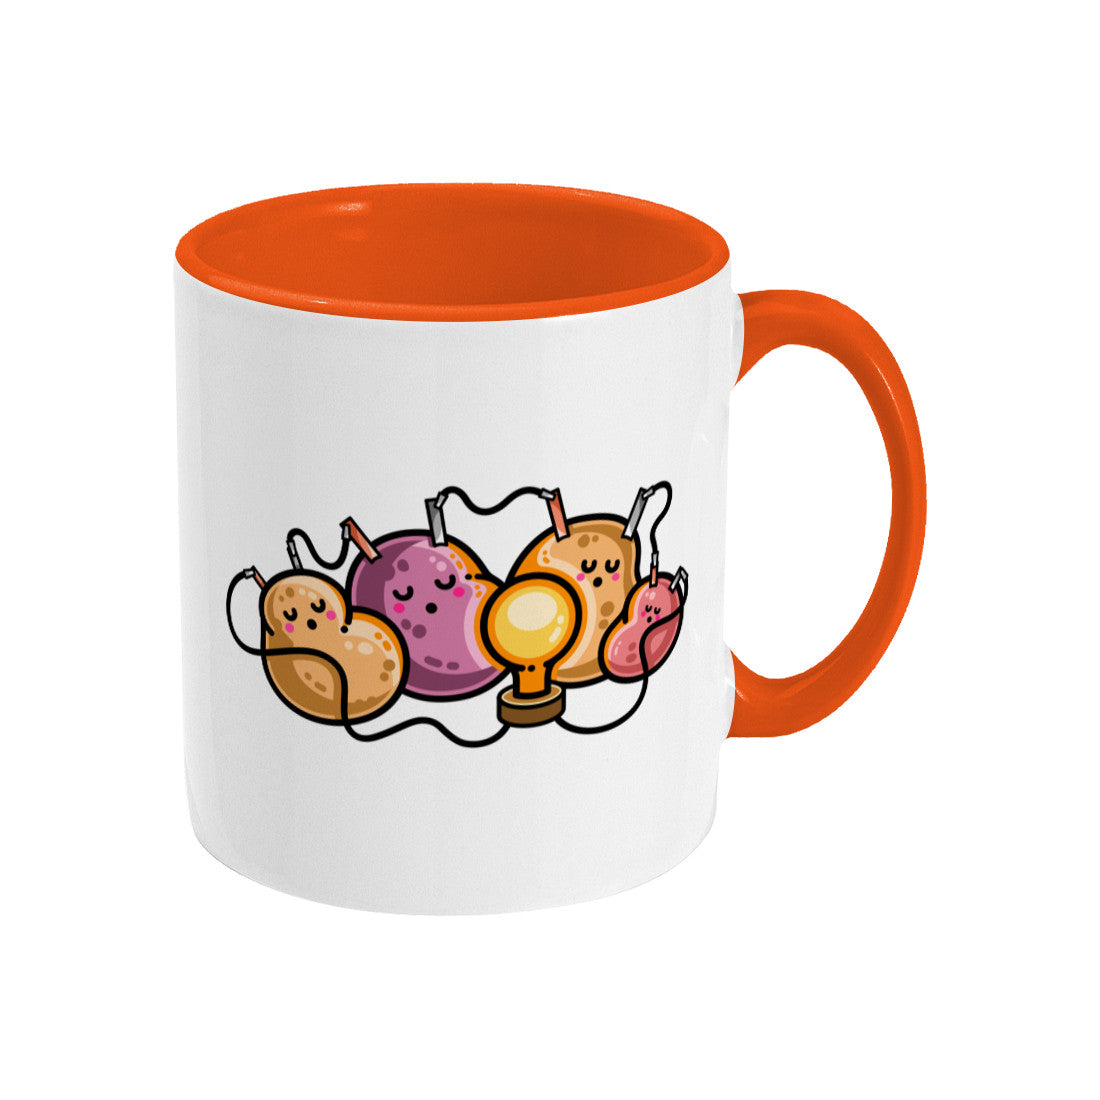 A two-toned white and orange ceramic mug with a design of a potato battery of 4 potatoes asleep around a light bulb they are powering, handle to the right